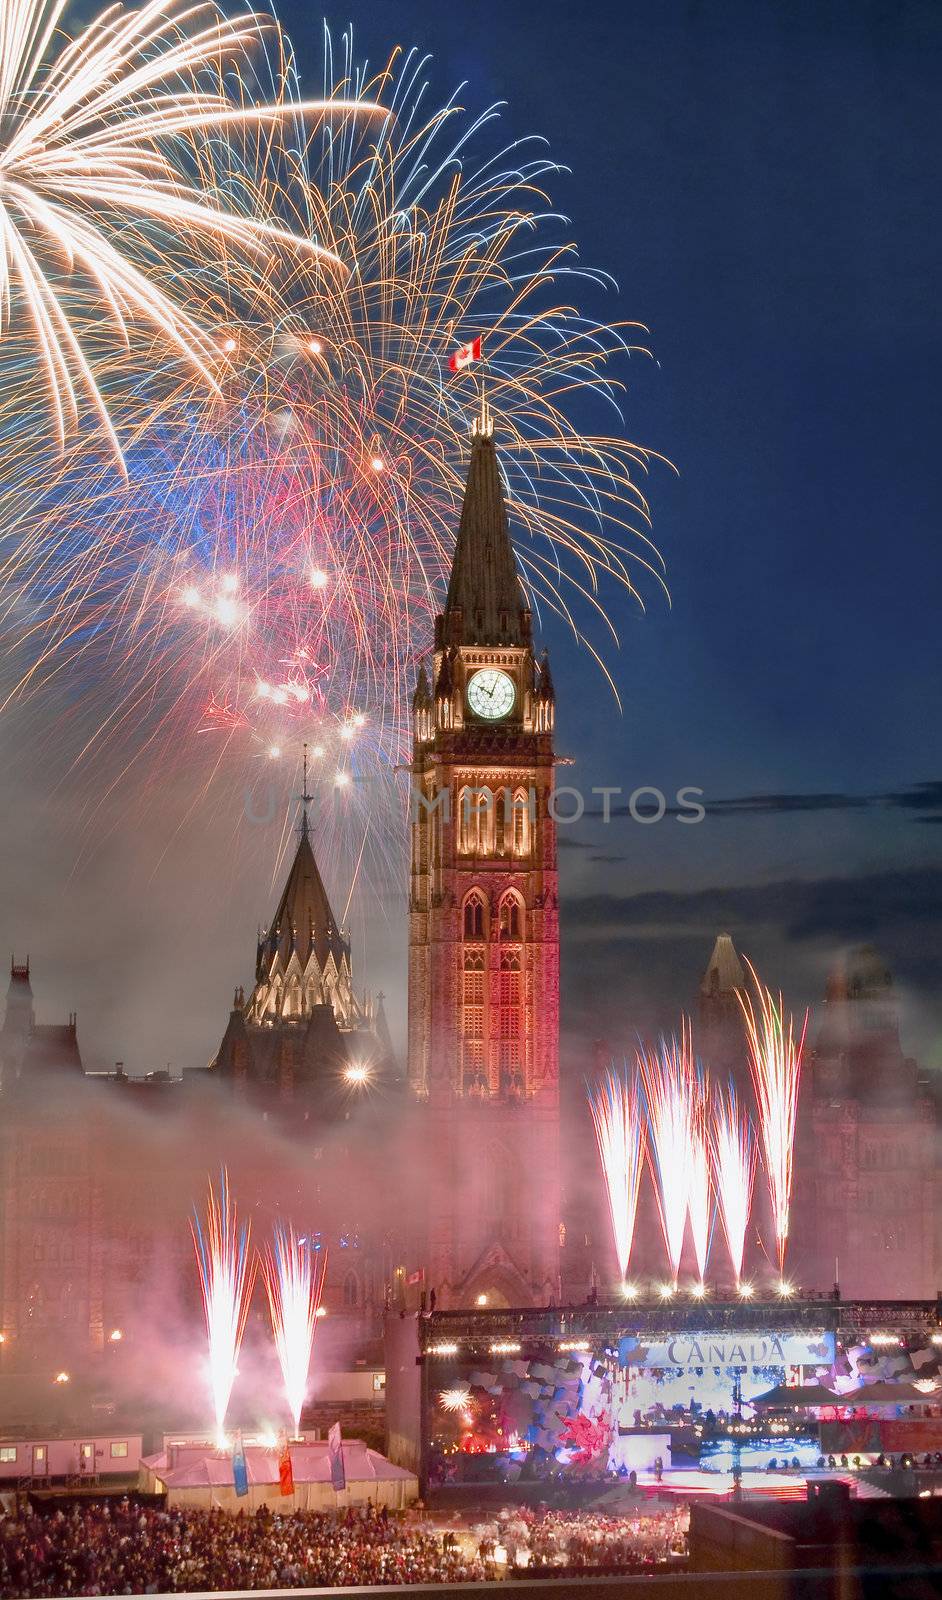 Canada Day by michelloiselle